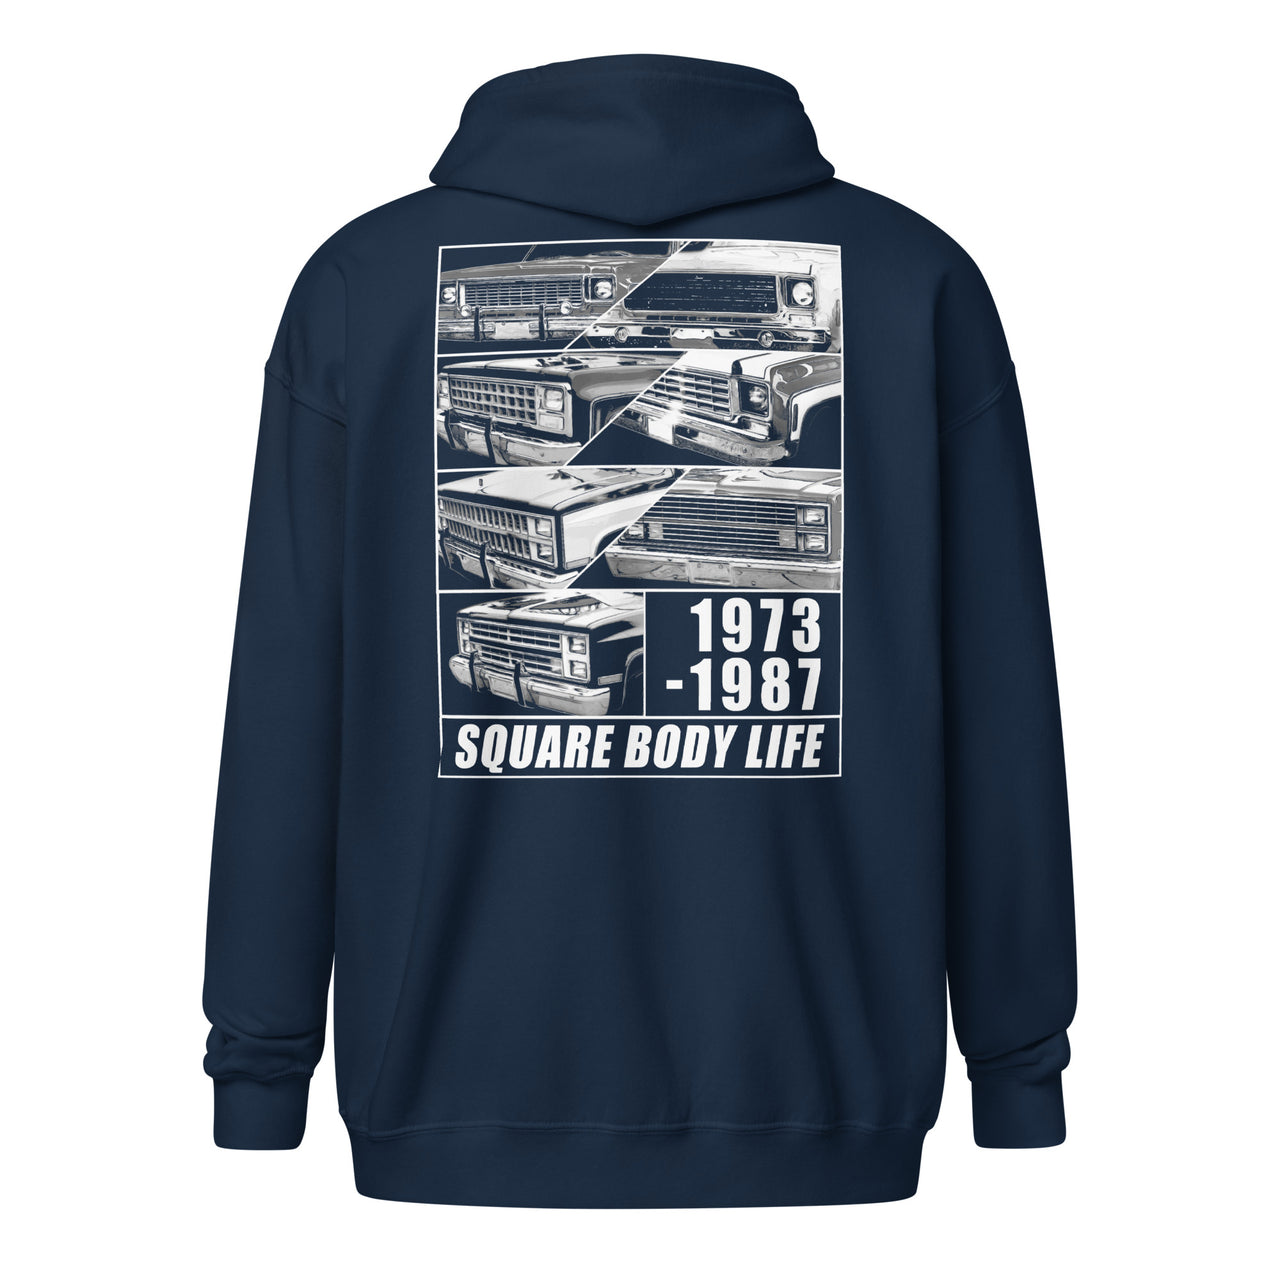 Square Body truck zip up hoodie in navy - back view